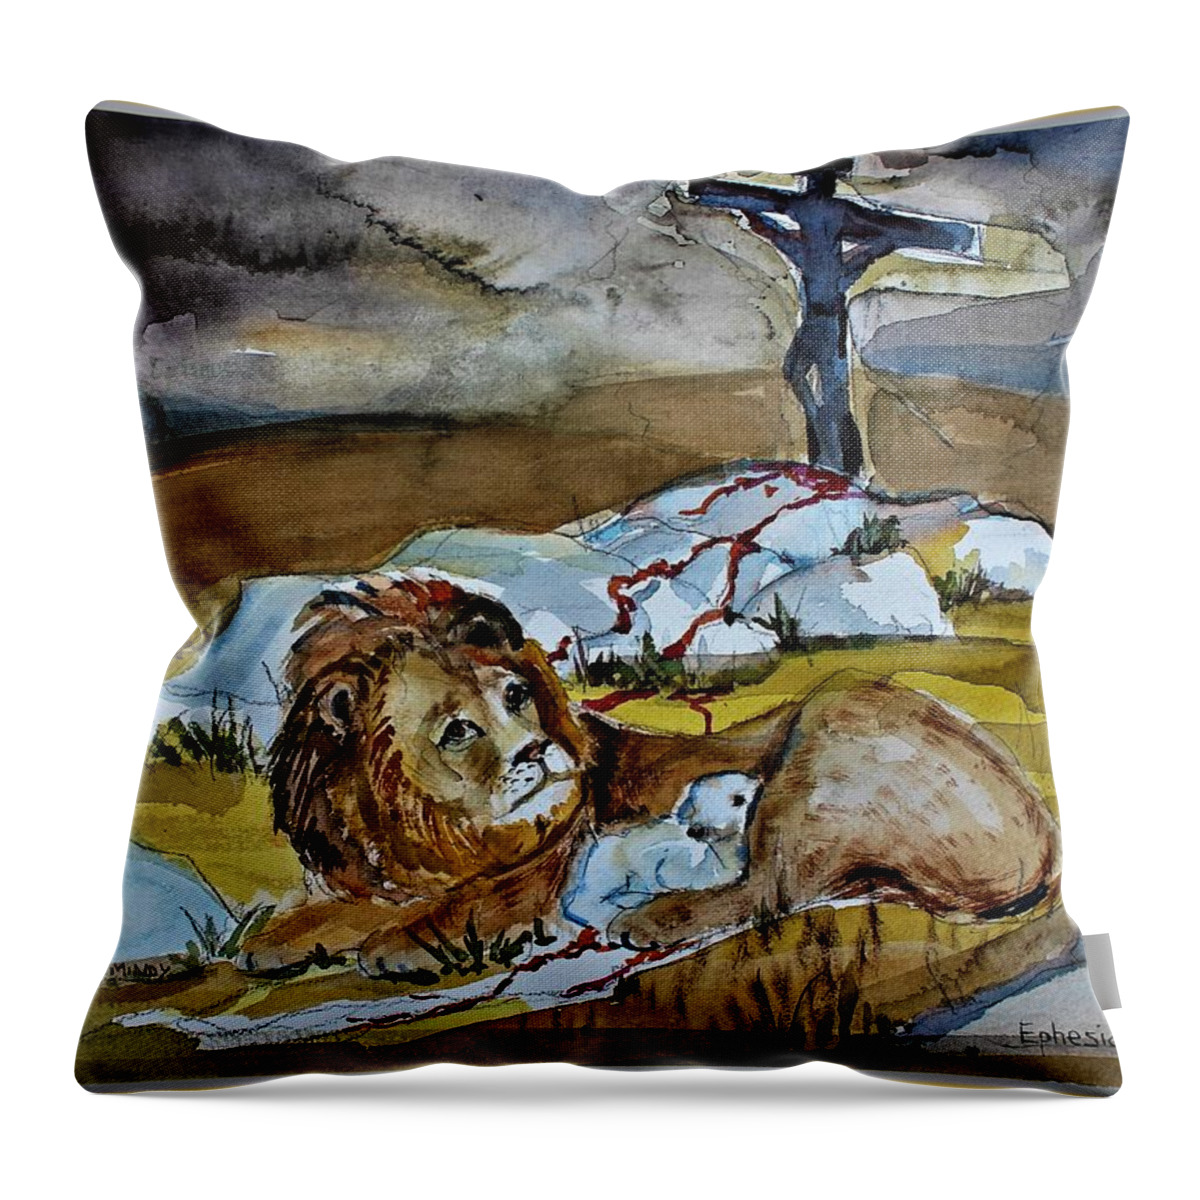 Lion Throw Pillow featuring the painting Ephesians 2 13 by Mindy Newman